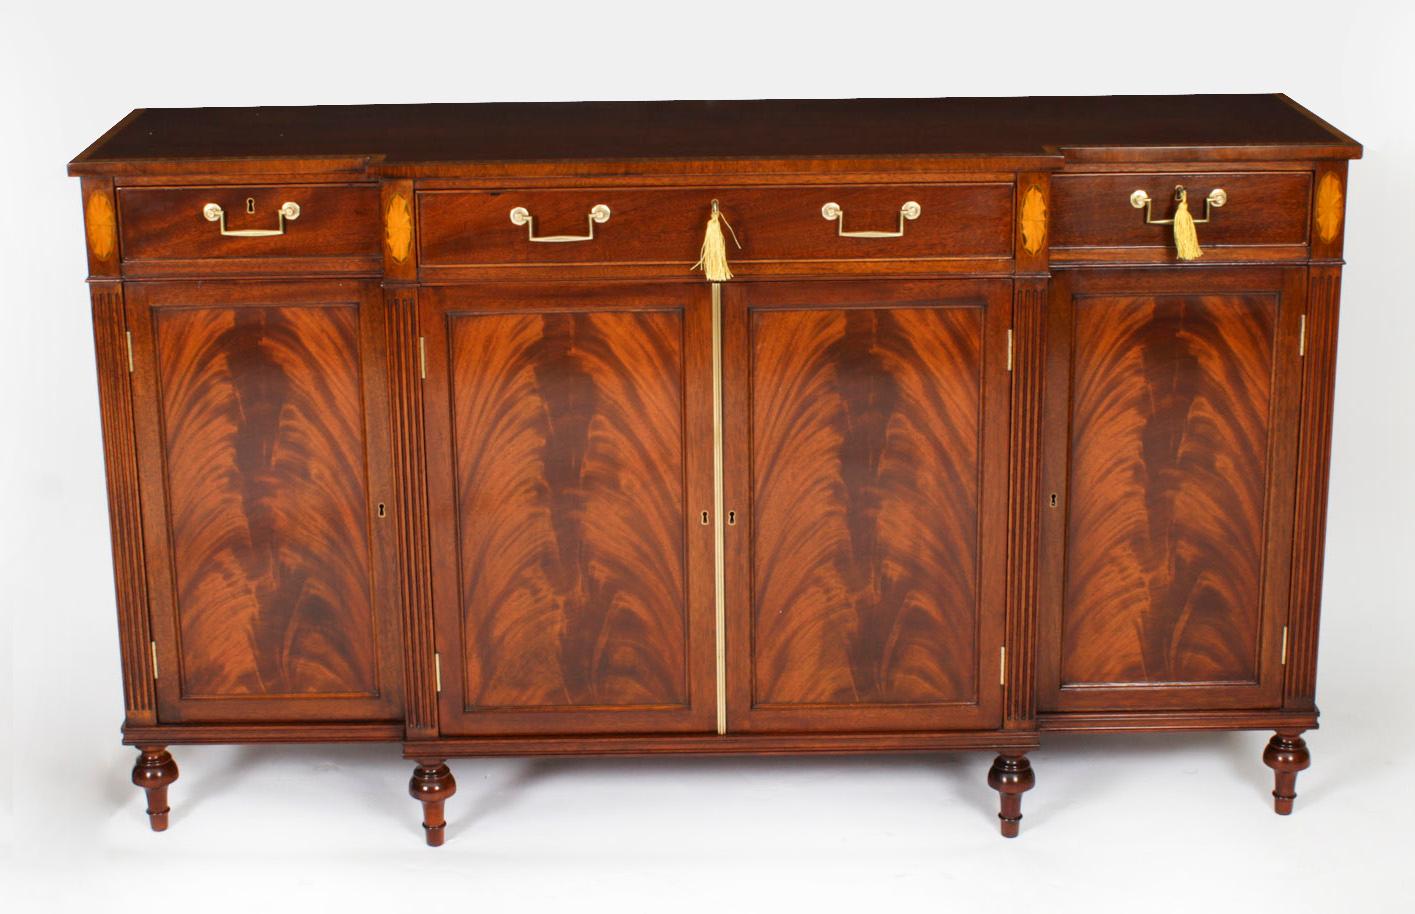 This is a fabulous Vintage Regency Revival breakfront sideboard by the master cabinet maker William Tillman,  Circa 1980 in date.

It is made of stunning  flame mahogany crossbanded in satinwood, fitted with drawers and cupboards and raised on